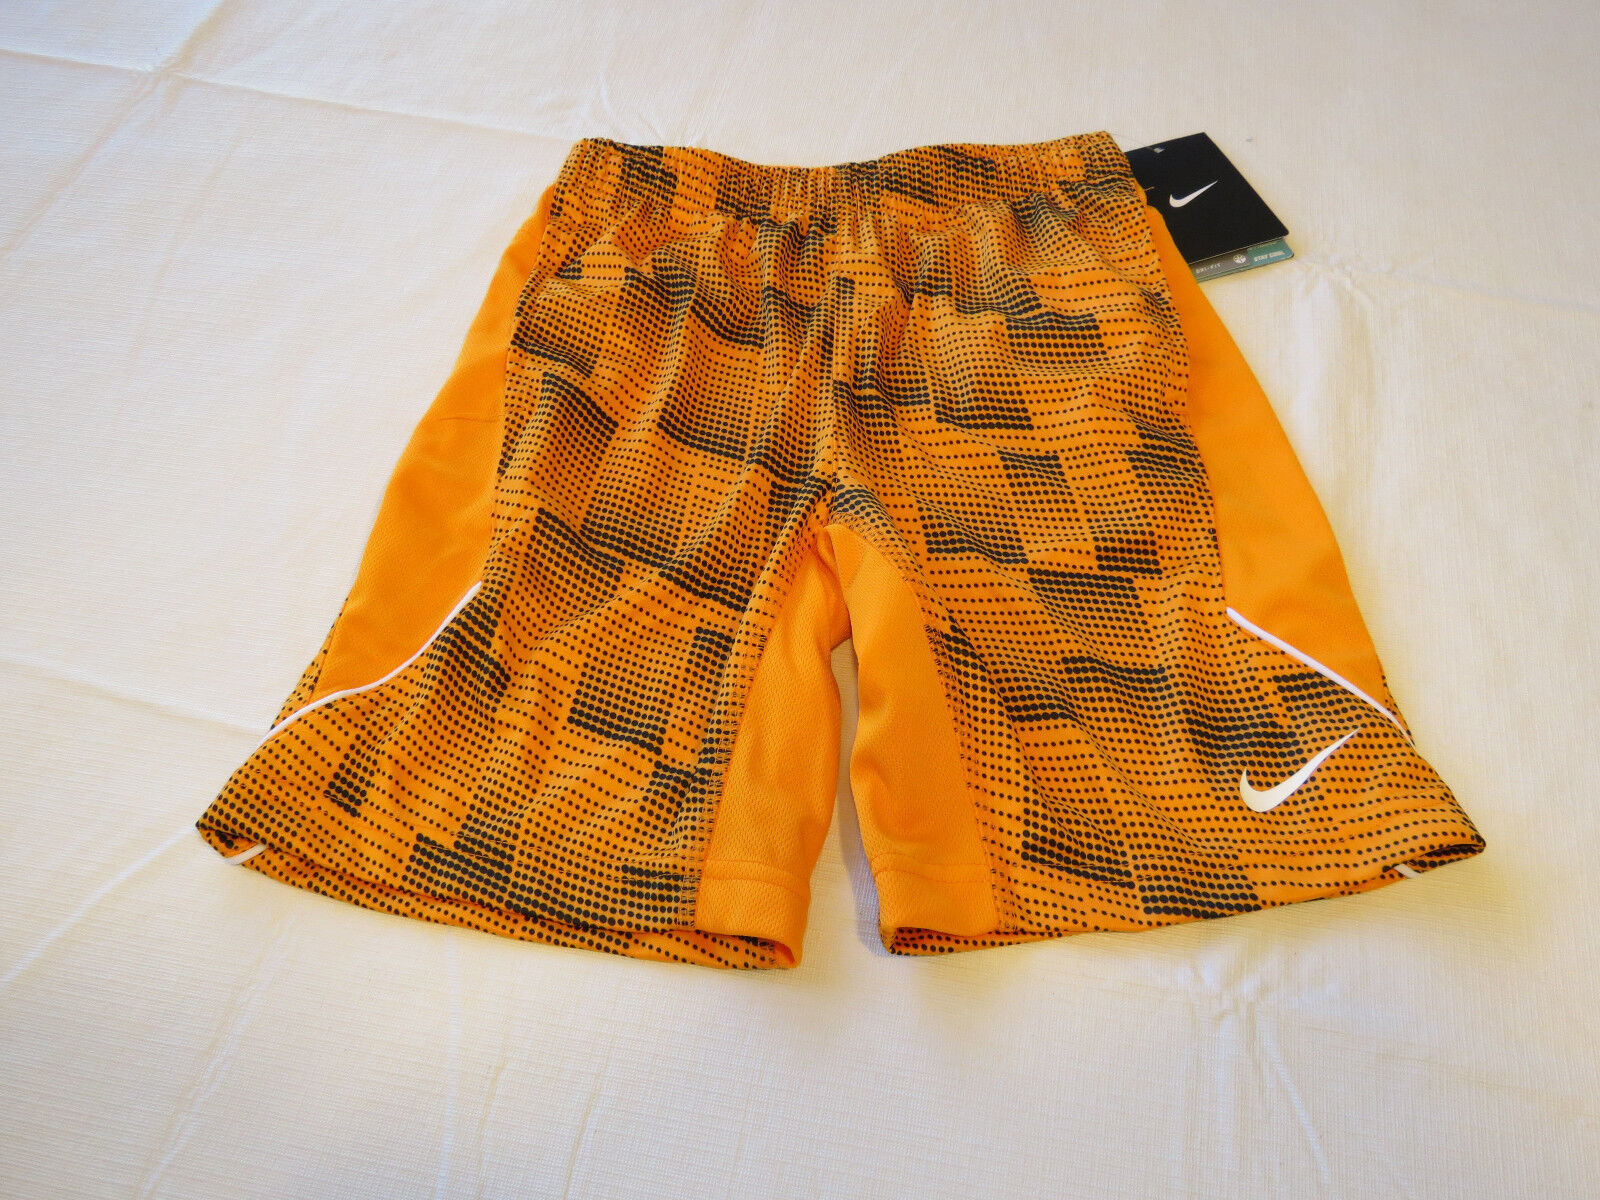 Primary image for Boys Nike Dri Fit Youth M 6 5-6 years active shorts 86A713 Vivid Orange N54 NEW